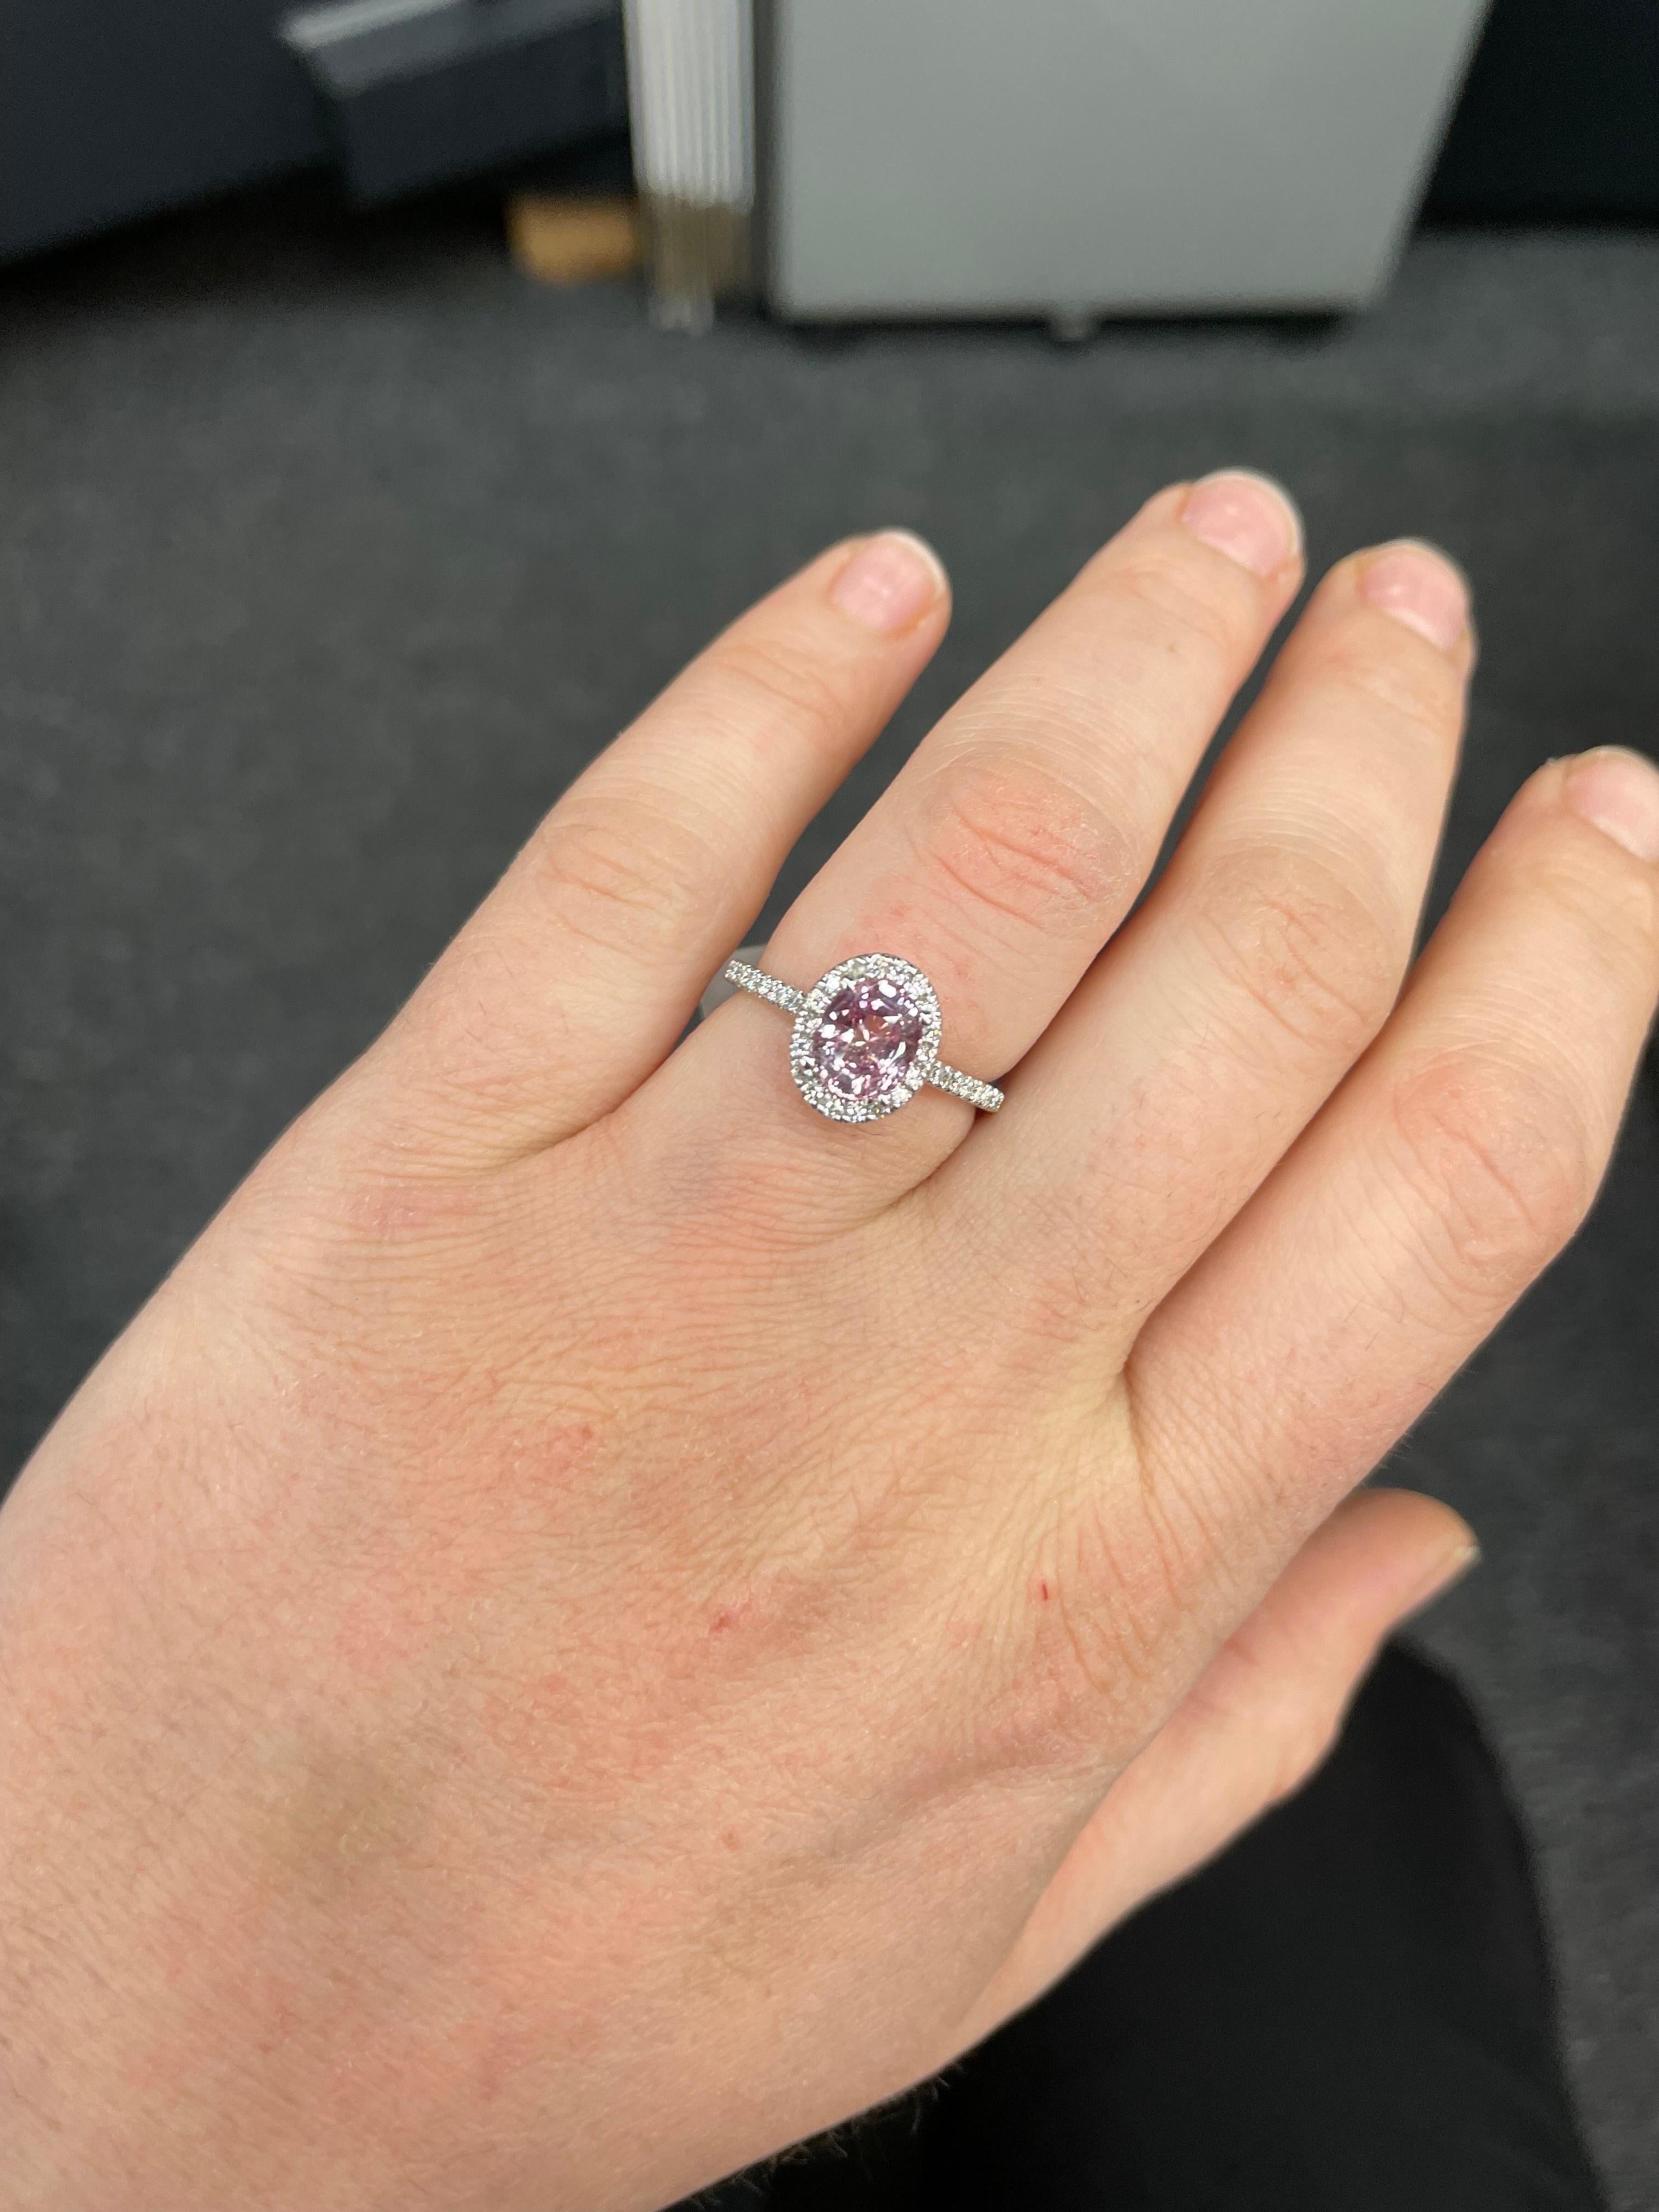 Certified Pink Sapphire No Heat Diamond Halo Ring 2.34 Carats 18k White Gold For Sale 2